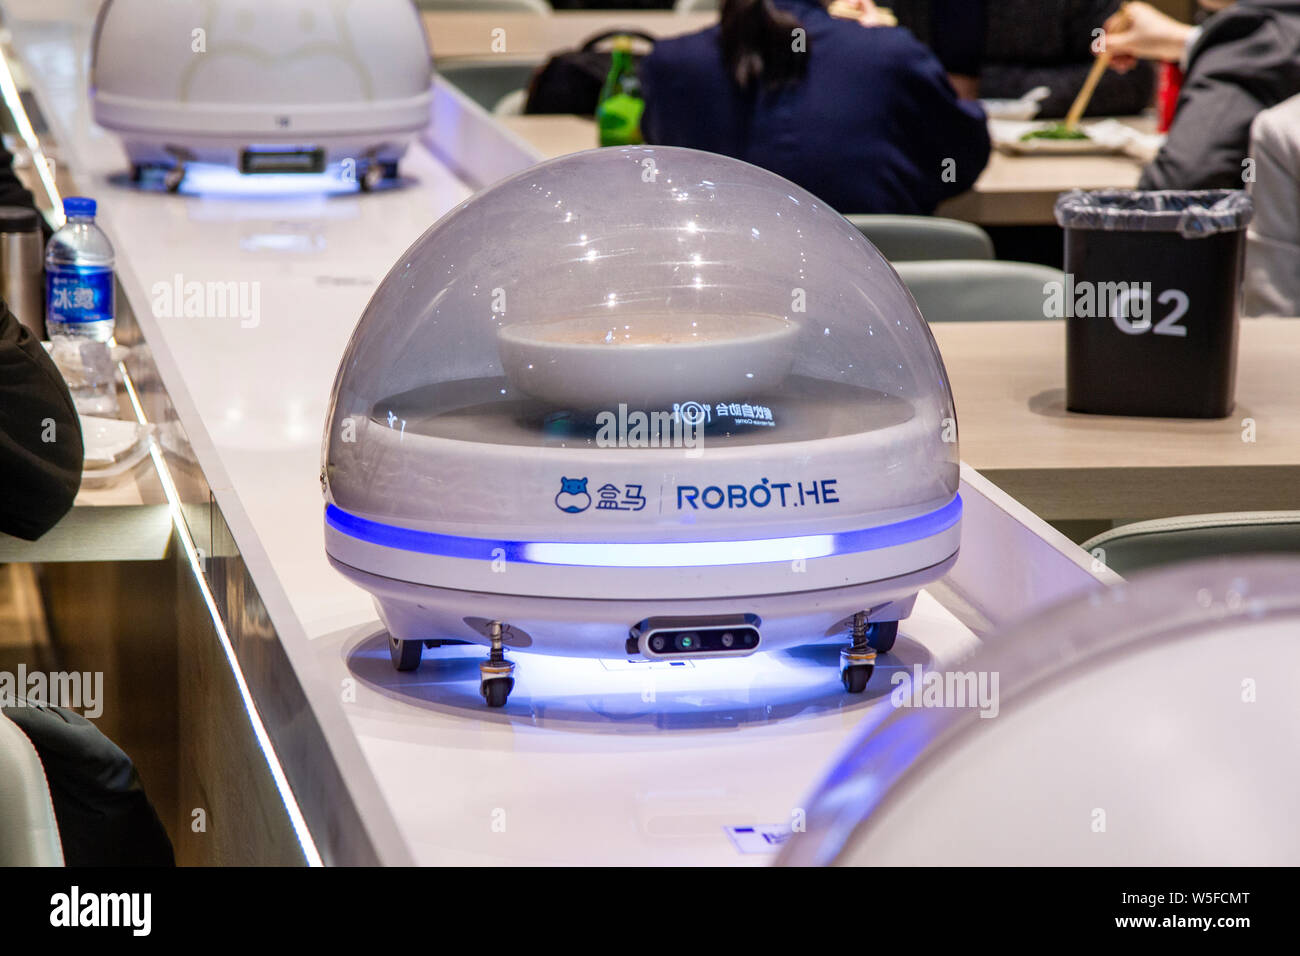 Dishes are delivered the small AI robots at Alibaba's digital restaurant Hema Xiansheng in Shanghai, China, 19 March 2019. Fresh Stock Photo - Alamy